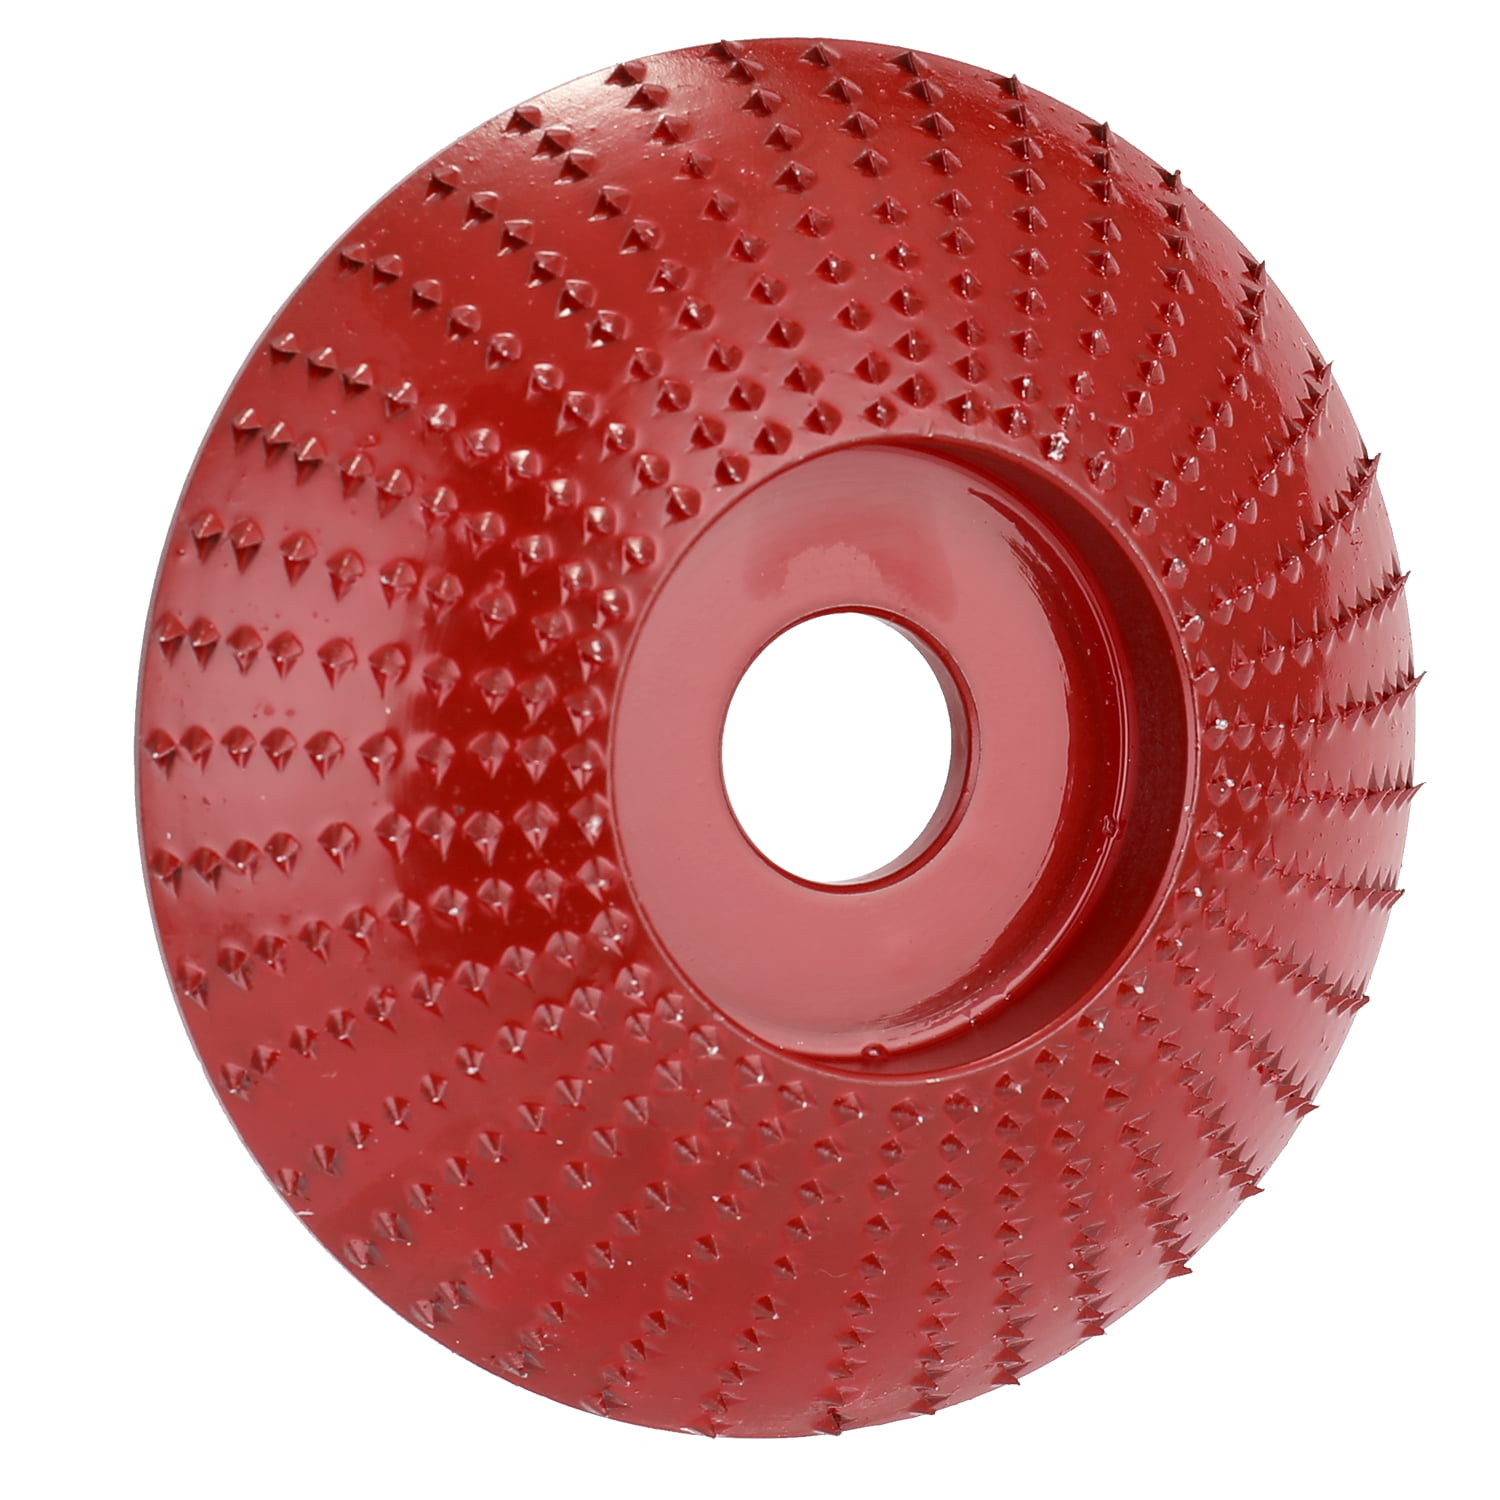 Wood Angle Grinding Wheel Sanding Carving Rotary Tools Abrasive Disc 16mm Bore 